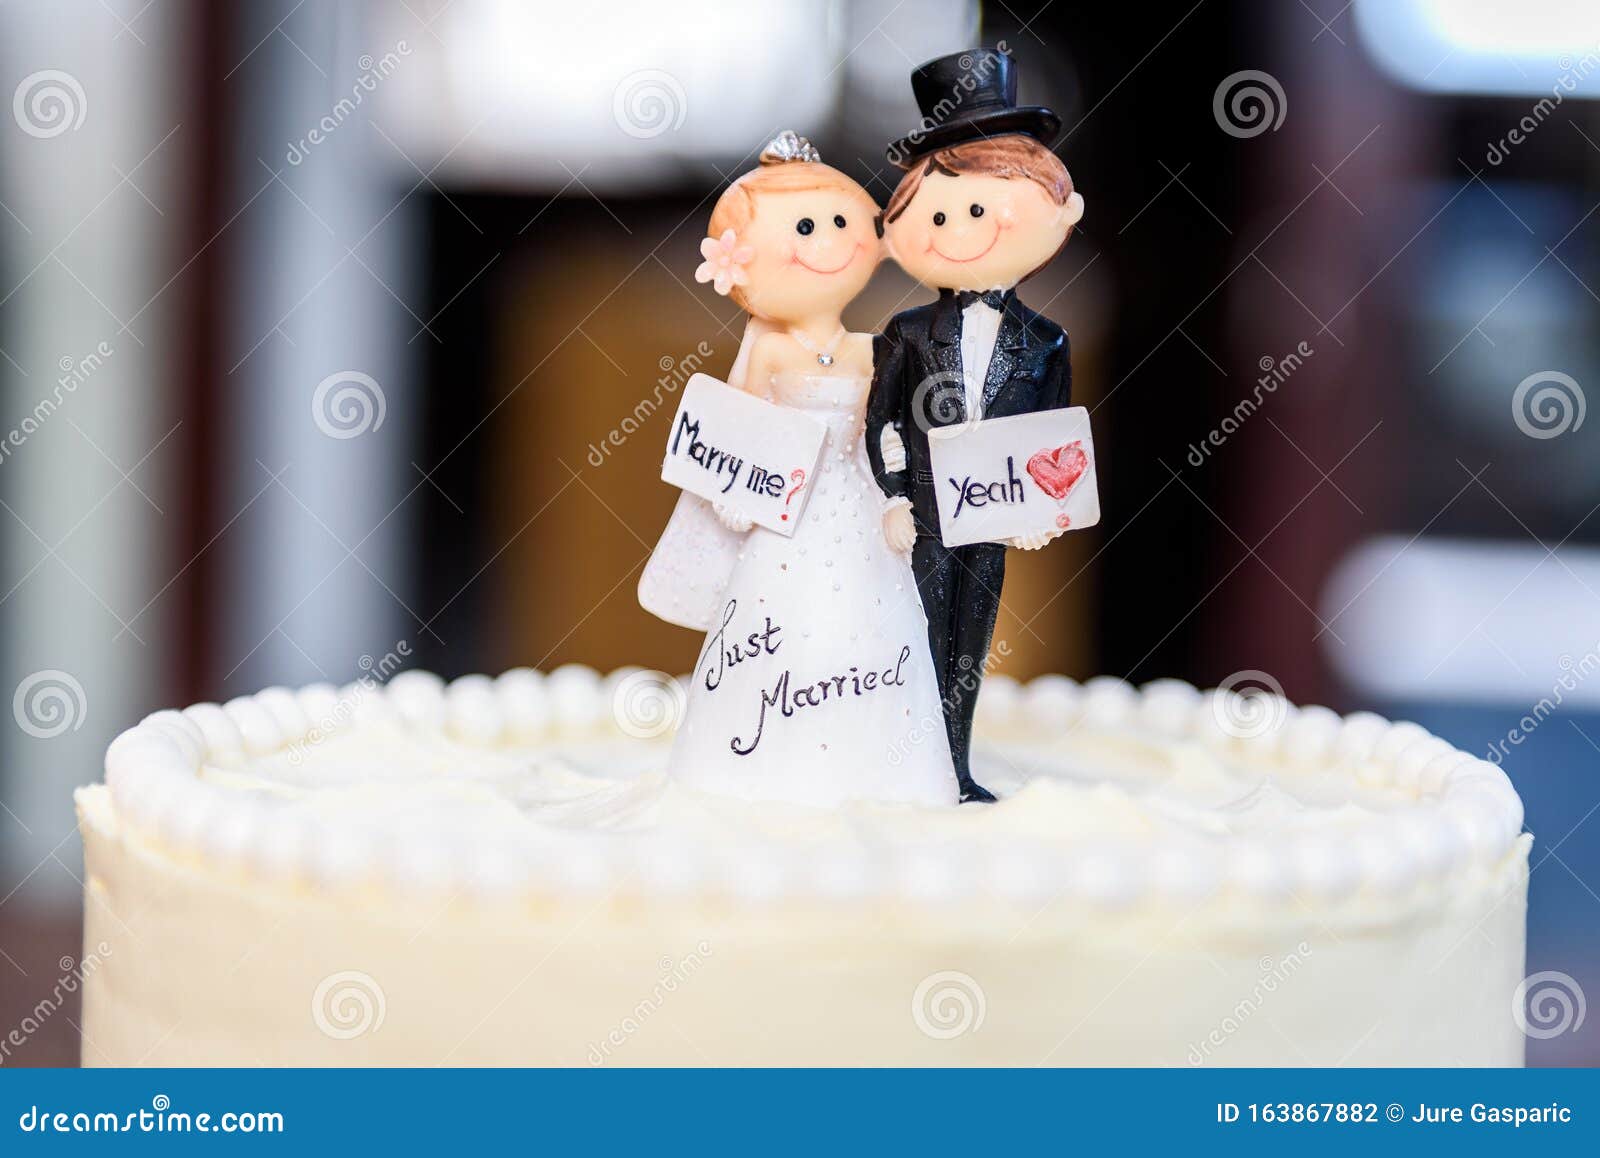 White Wedding Cake with Bride and Groom Figurines on Top Stock ...